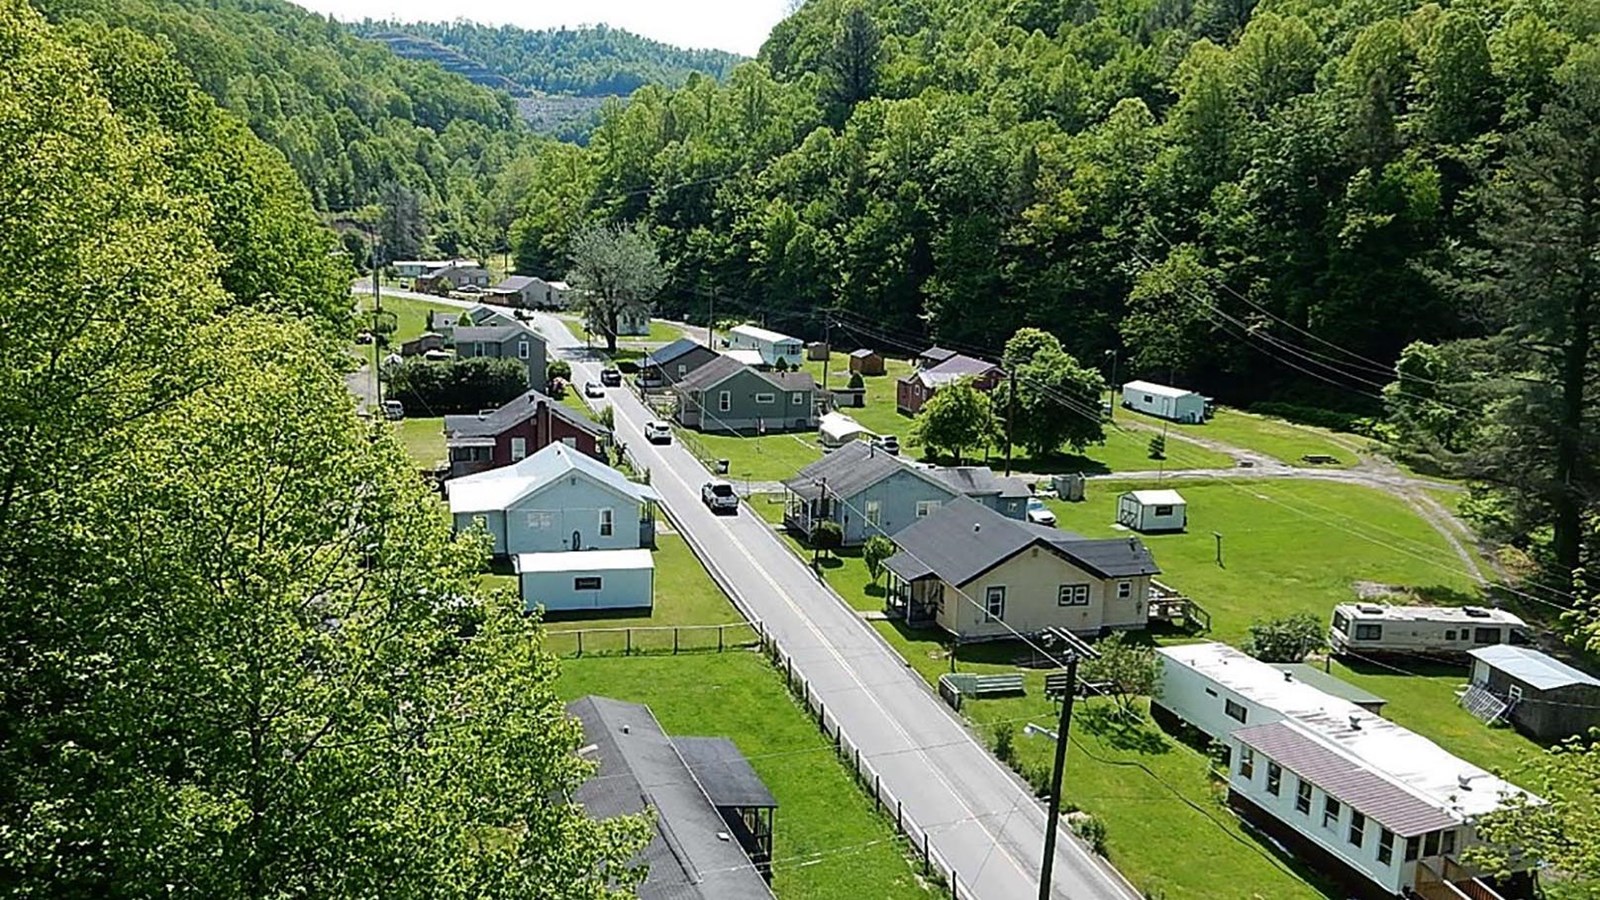 Overhead view of road through small town surrounded by mountains